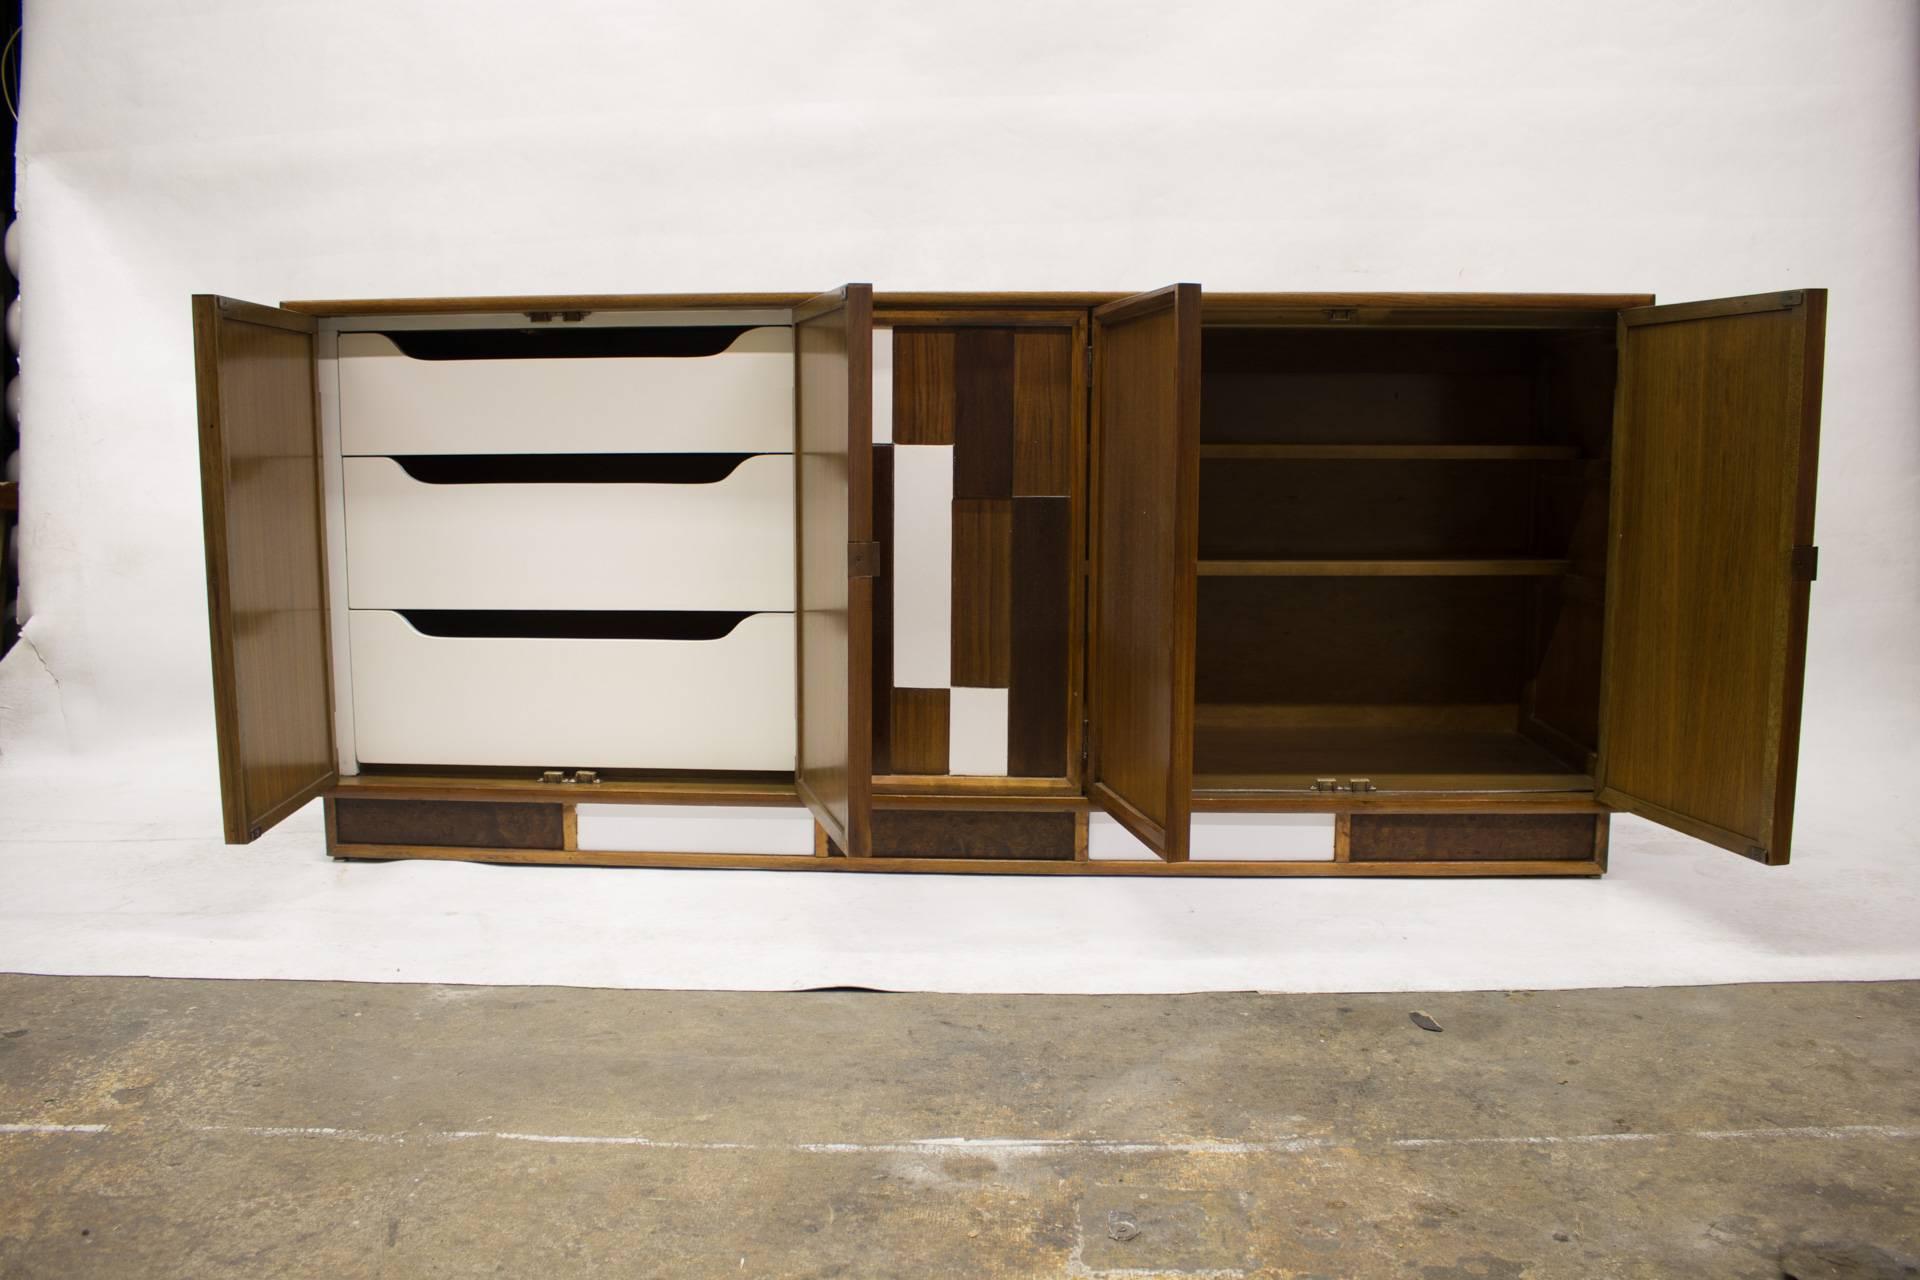 This cabinet combines graphic imagery and texture to capture a unique design. The two left doors open on three drawers and the two right ones on two half way shelves.